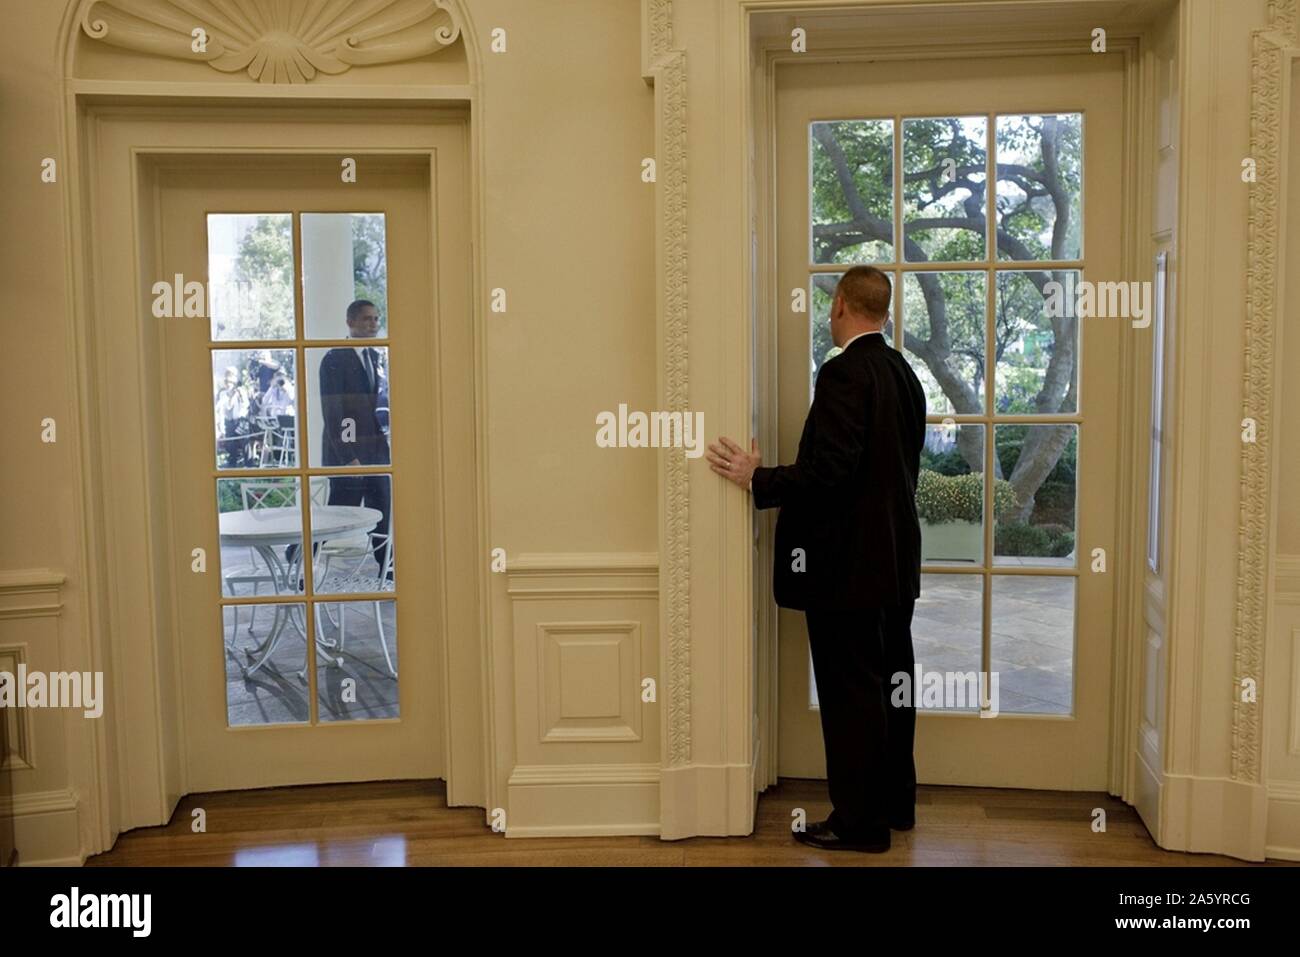 US secret service agent in the oval office, prepares to open a door as President Obama approaches Stock Photo